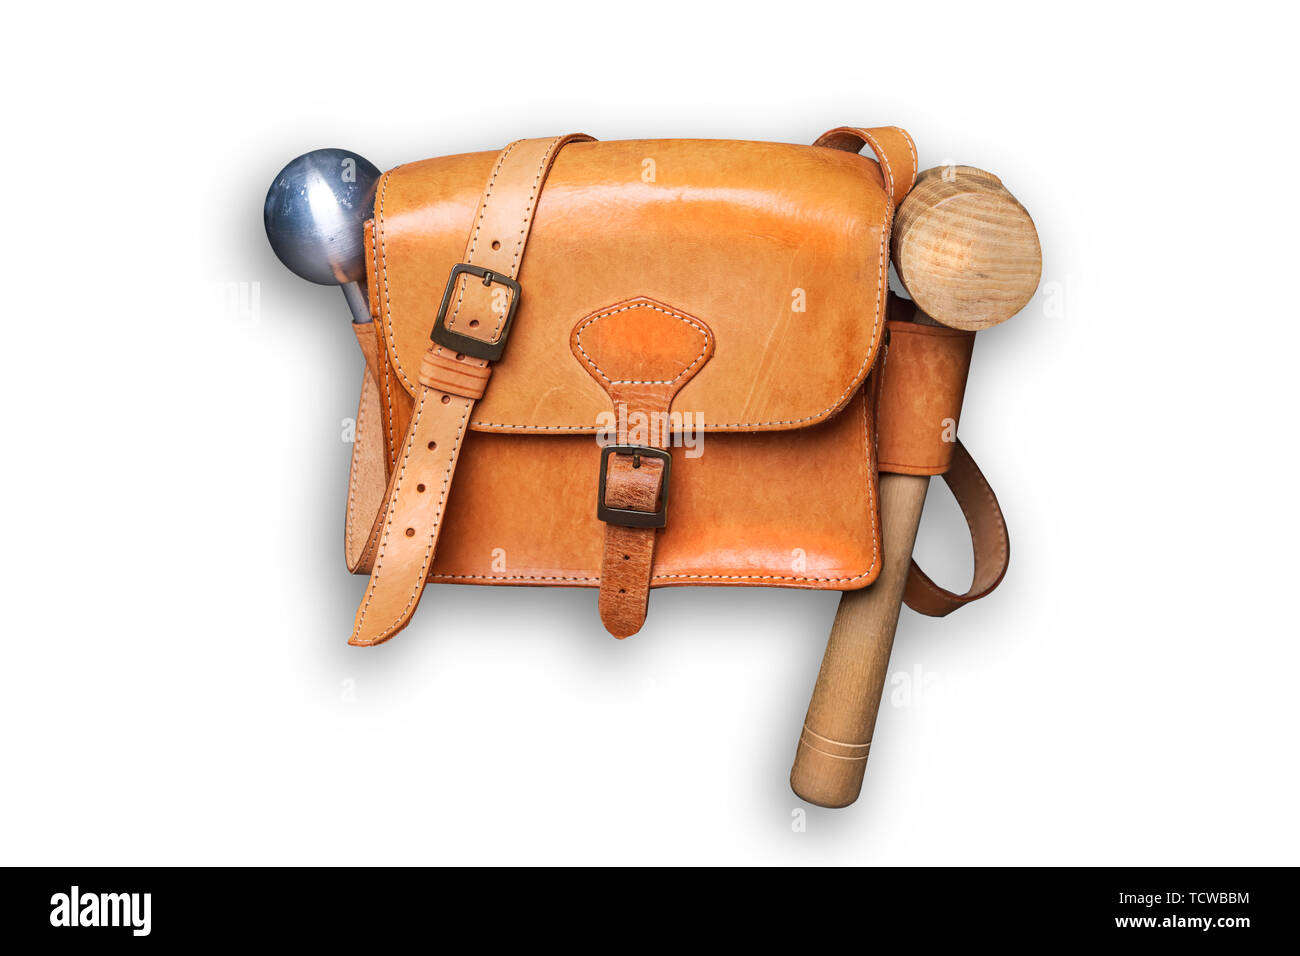 A  leather bag with tools for  Boellerschiessen. Boellerschiessen in Germany or Prangerschiessen in Austrian is the saluting gun shooting tradition th Stock Photo